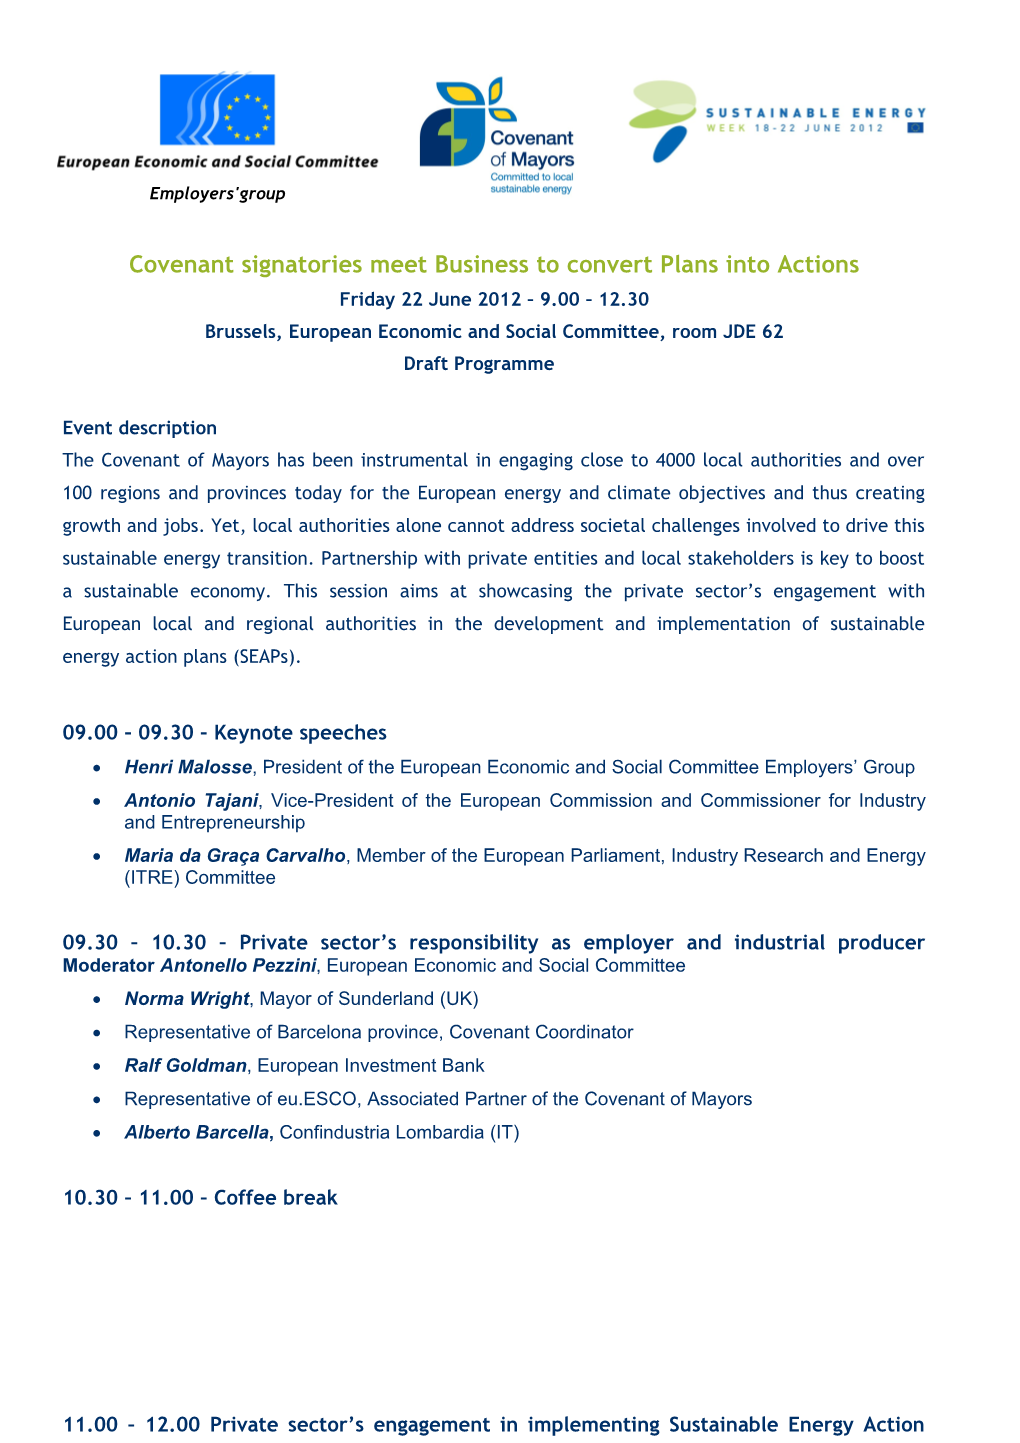 Covenant of Mayors Event, 22 June, Morning (10